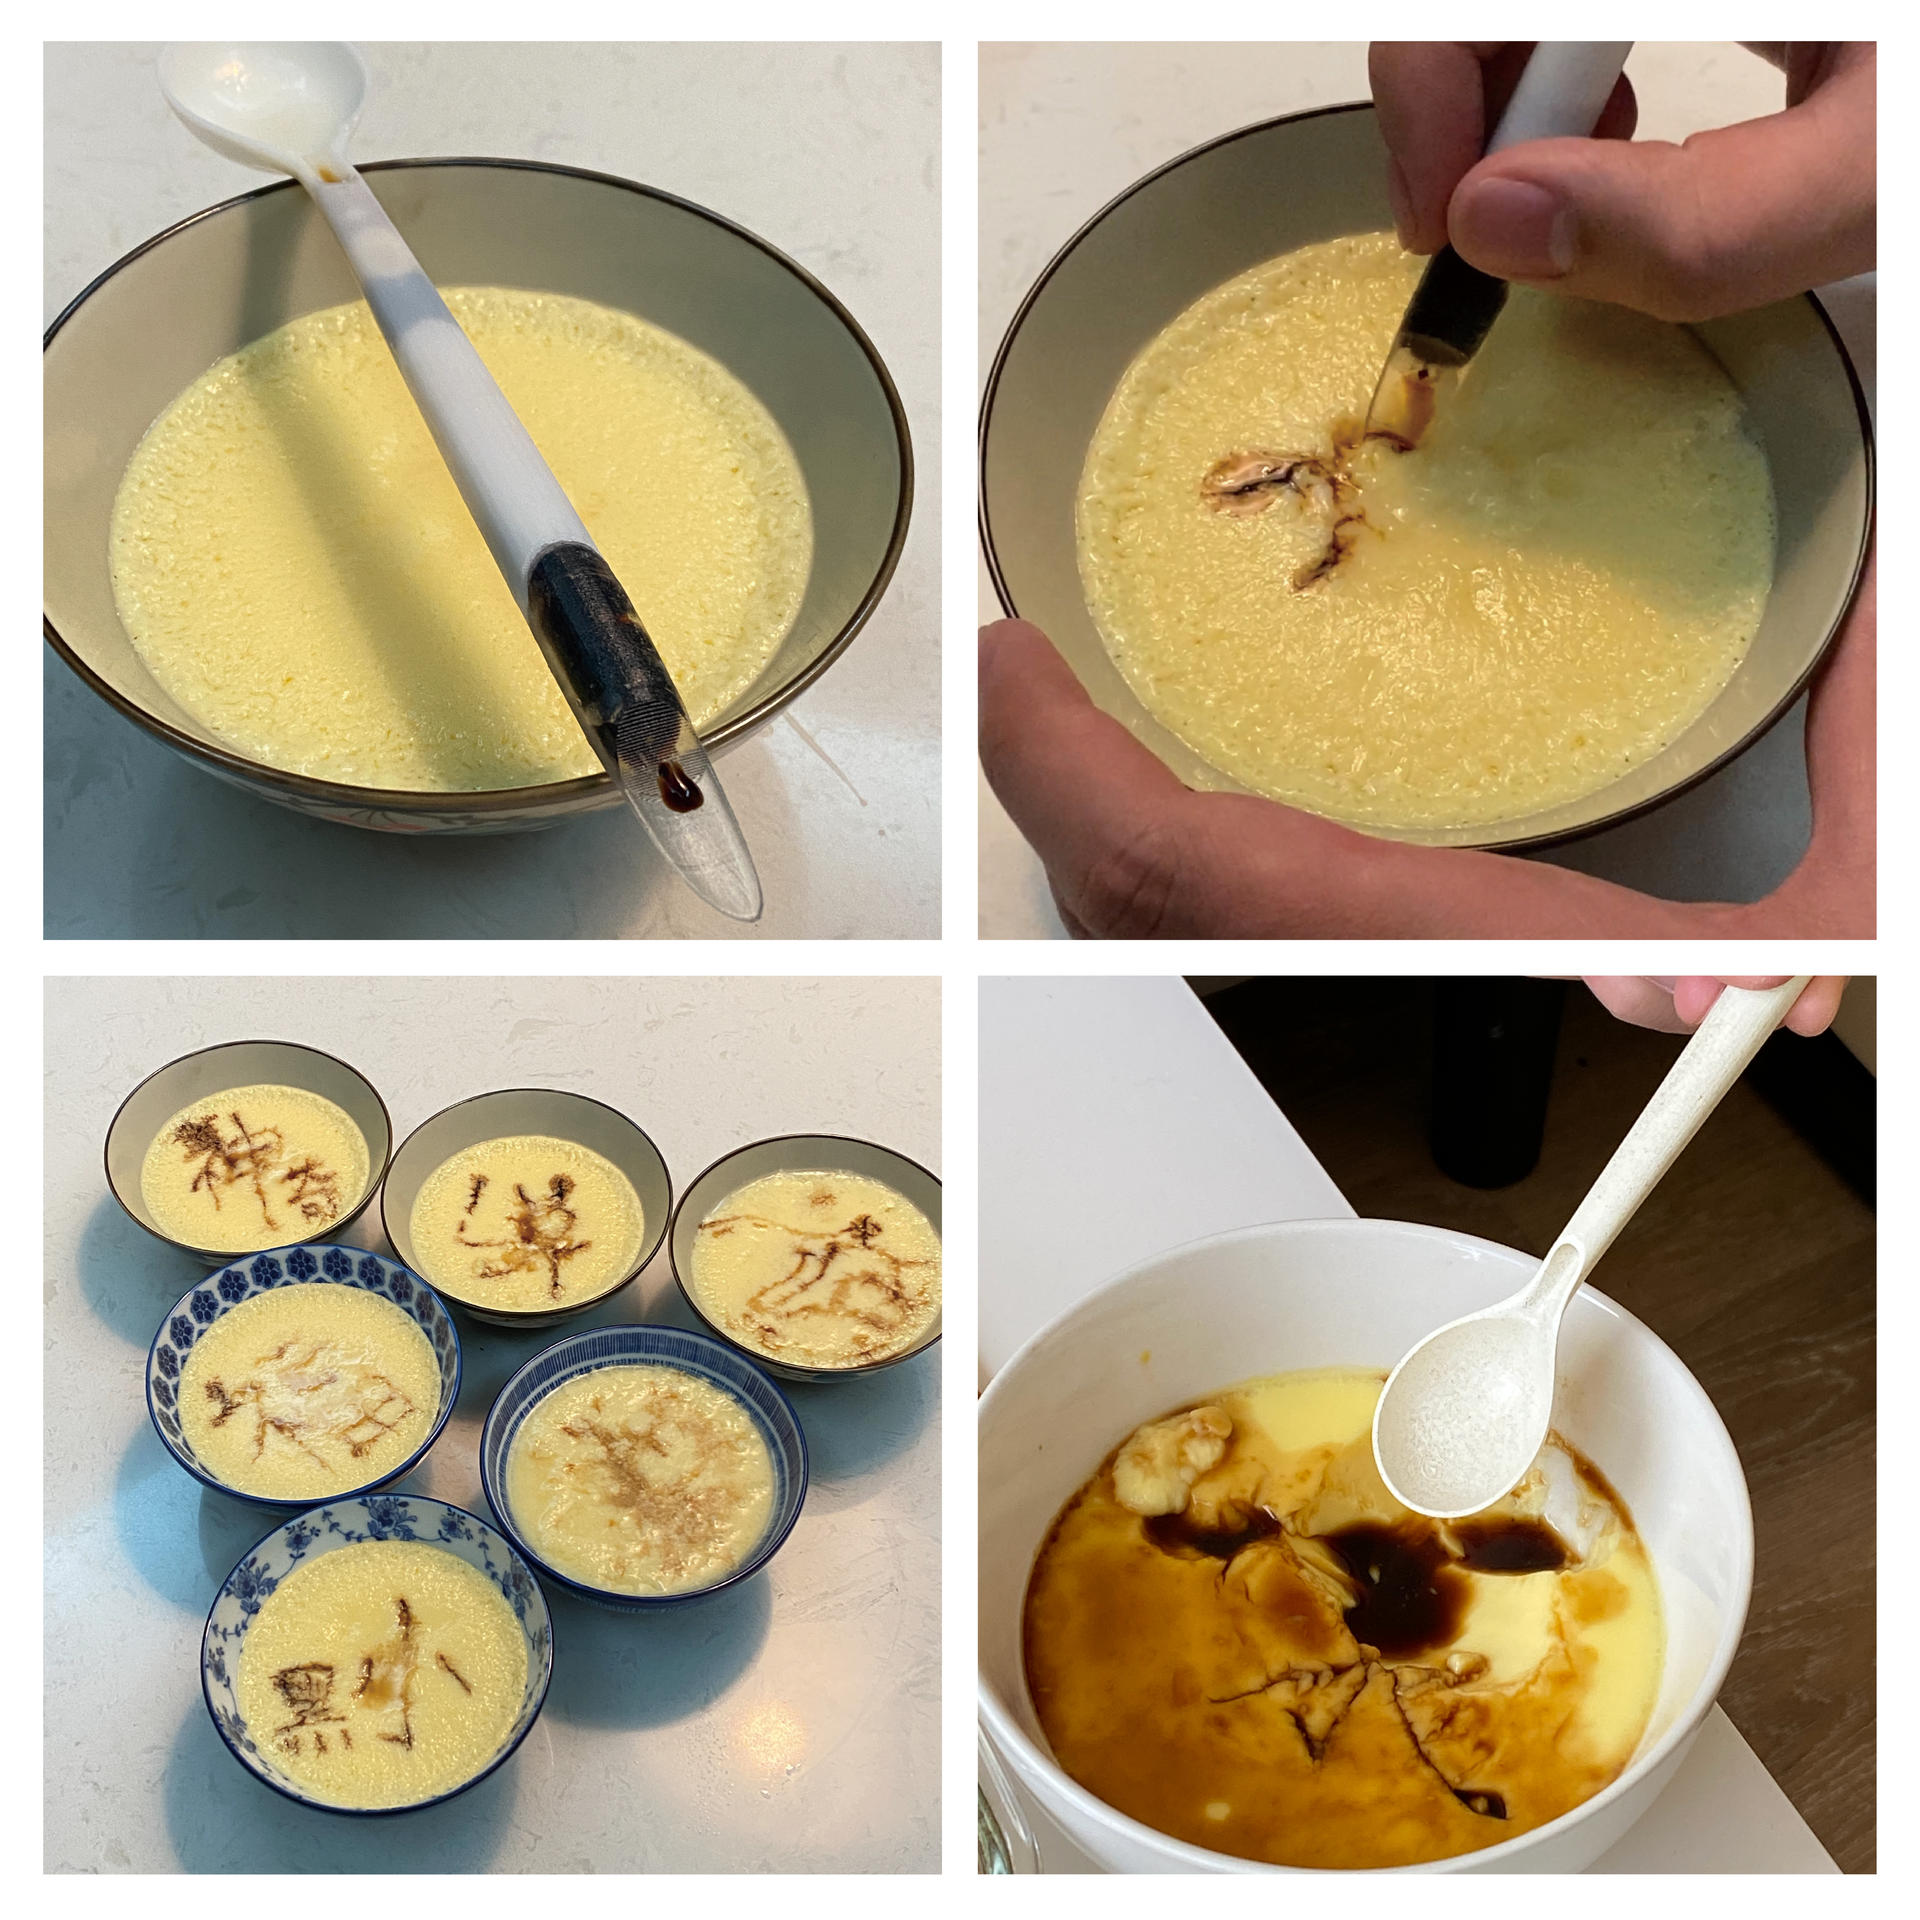 A set of pictures showing how to use a white spoon to eat steam egg